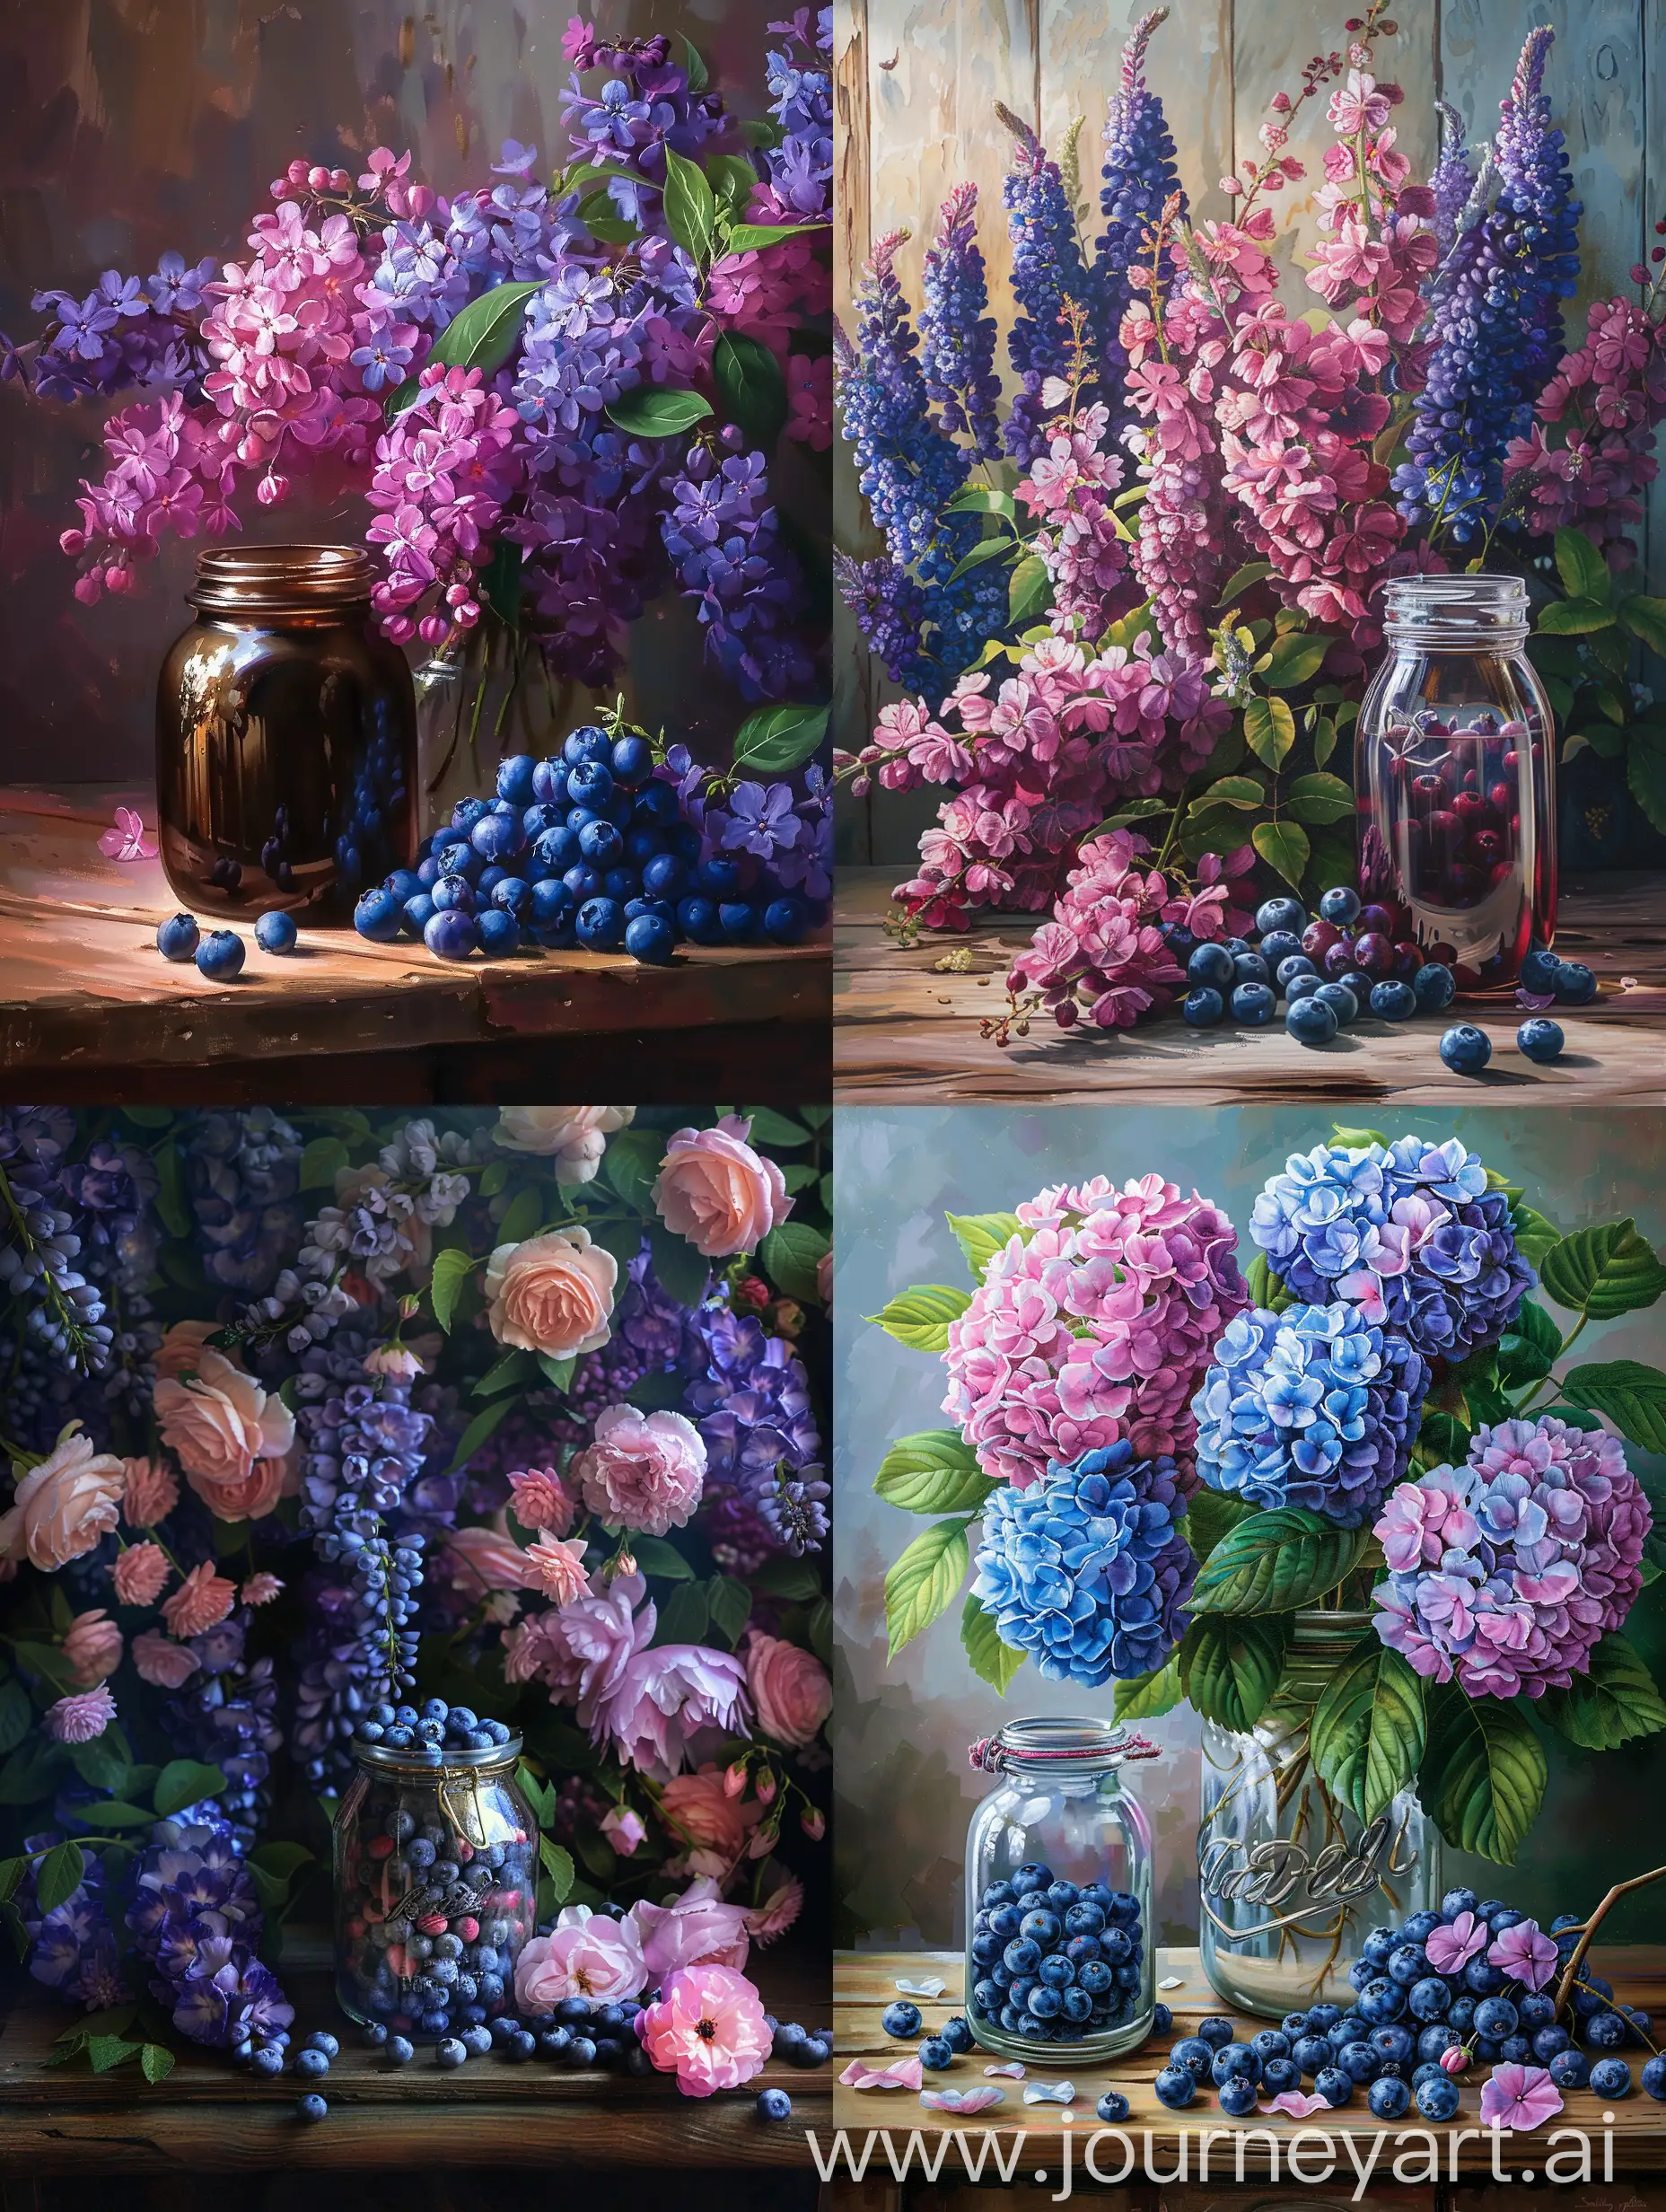 https://midjo.ru/new/uploads/img/b75dda5406/-13123123.png this jar stands on a wooden table, behind it there are many purple and pink flowers, There are blueberries next to the jar, image in photorealism --ar 3:4